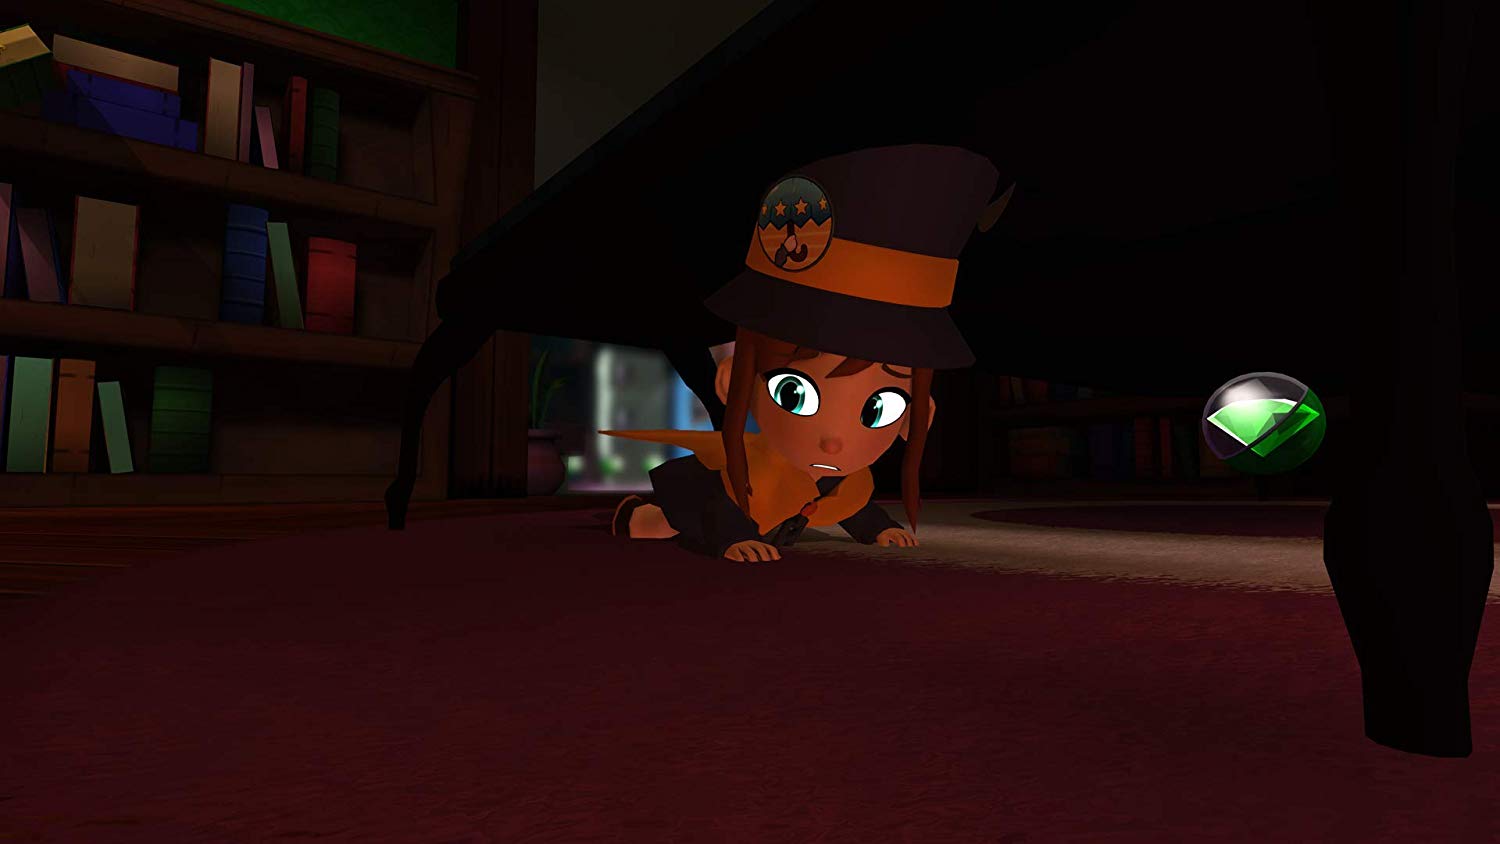 a hat in time physical switch